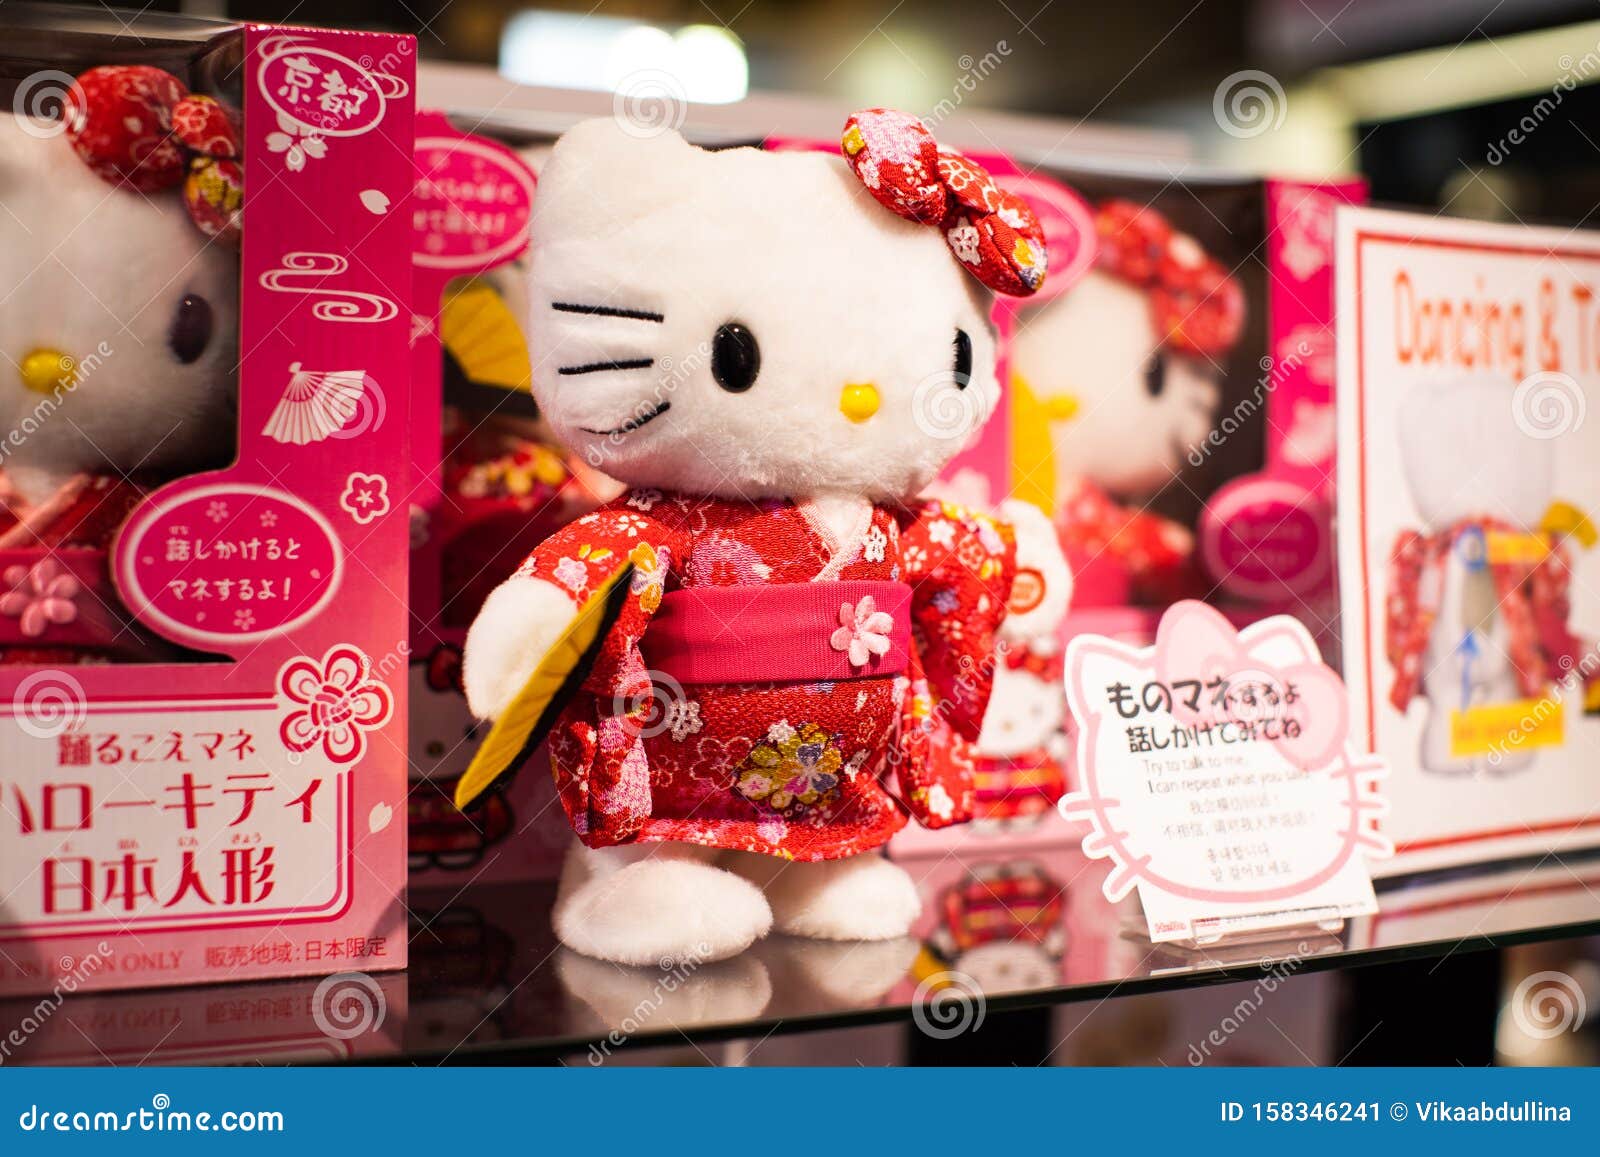 Hello Kitty STYLIE Doll